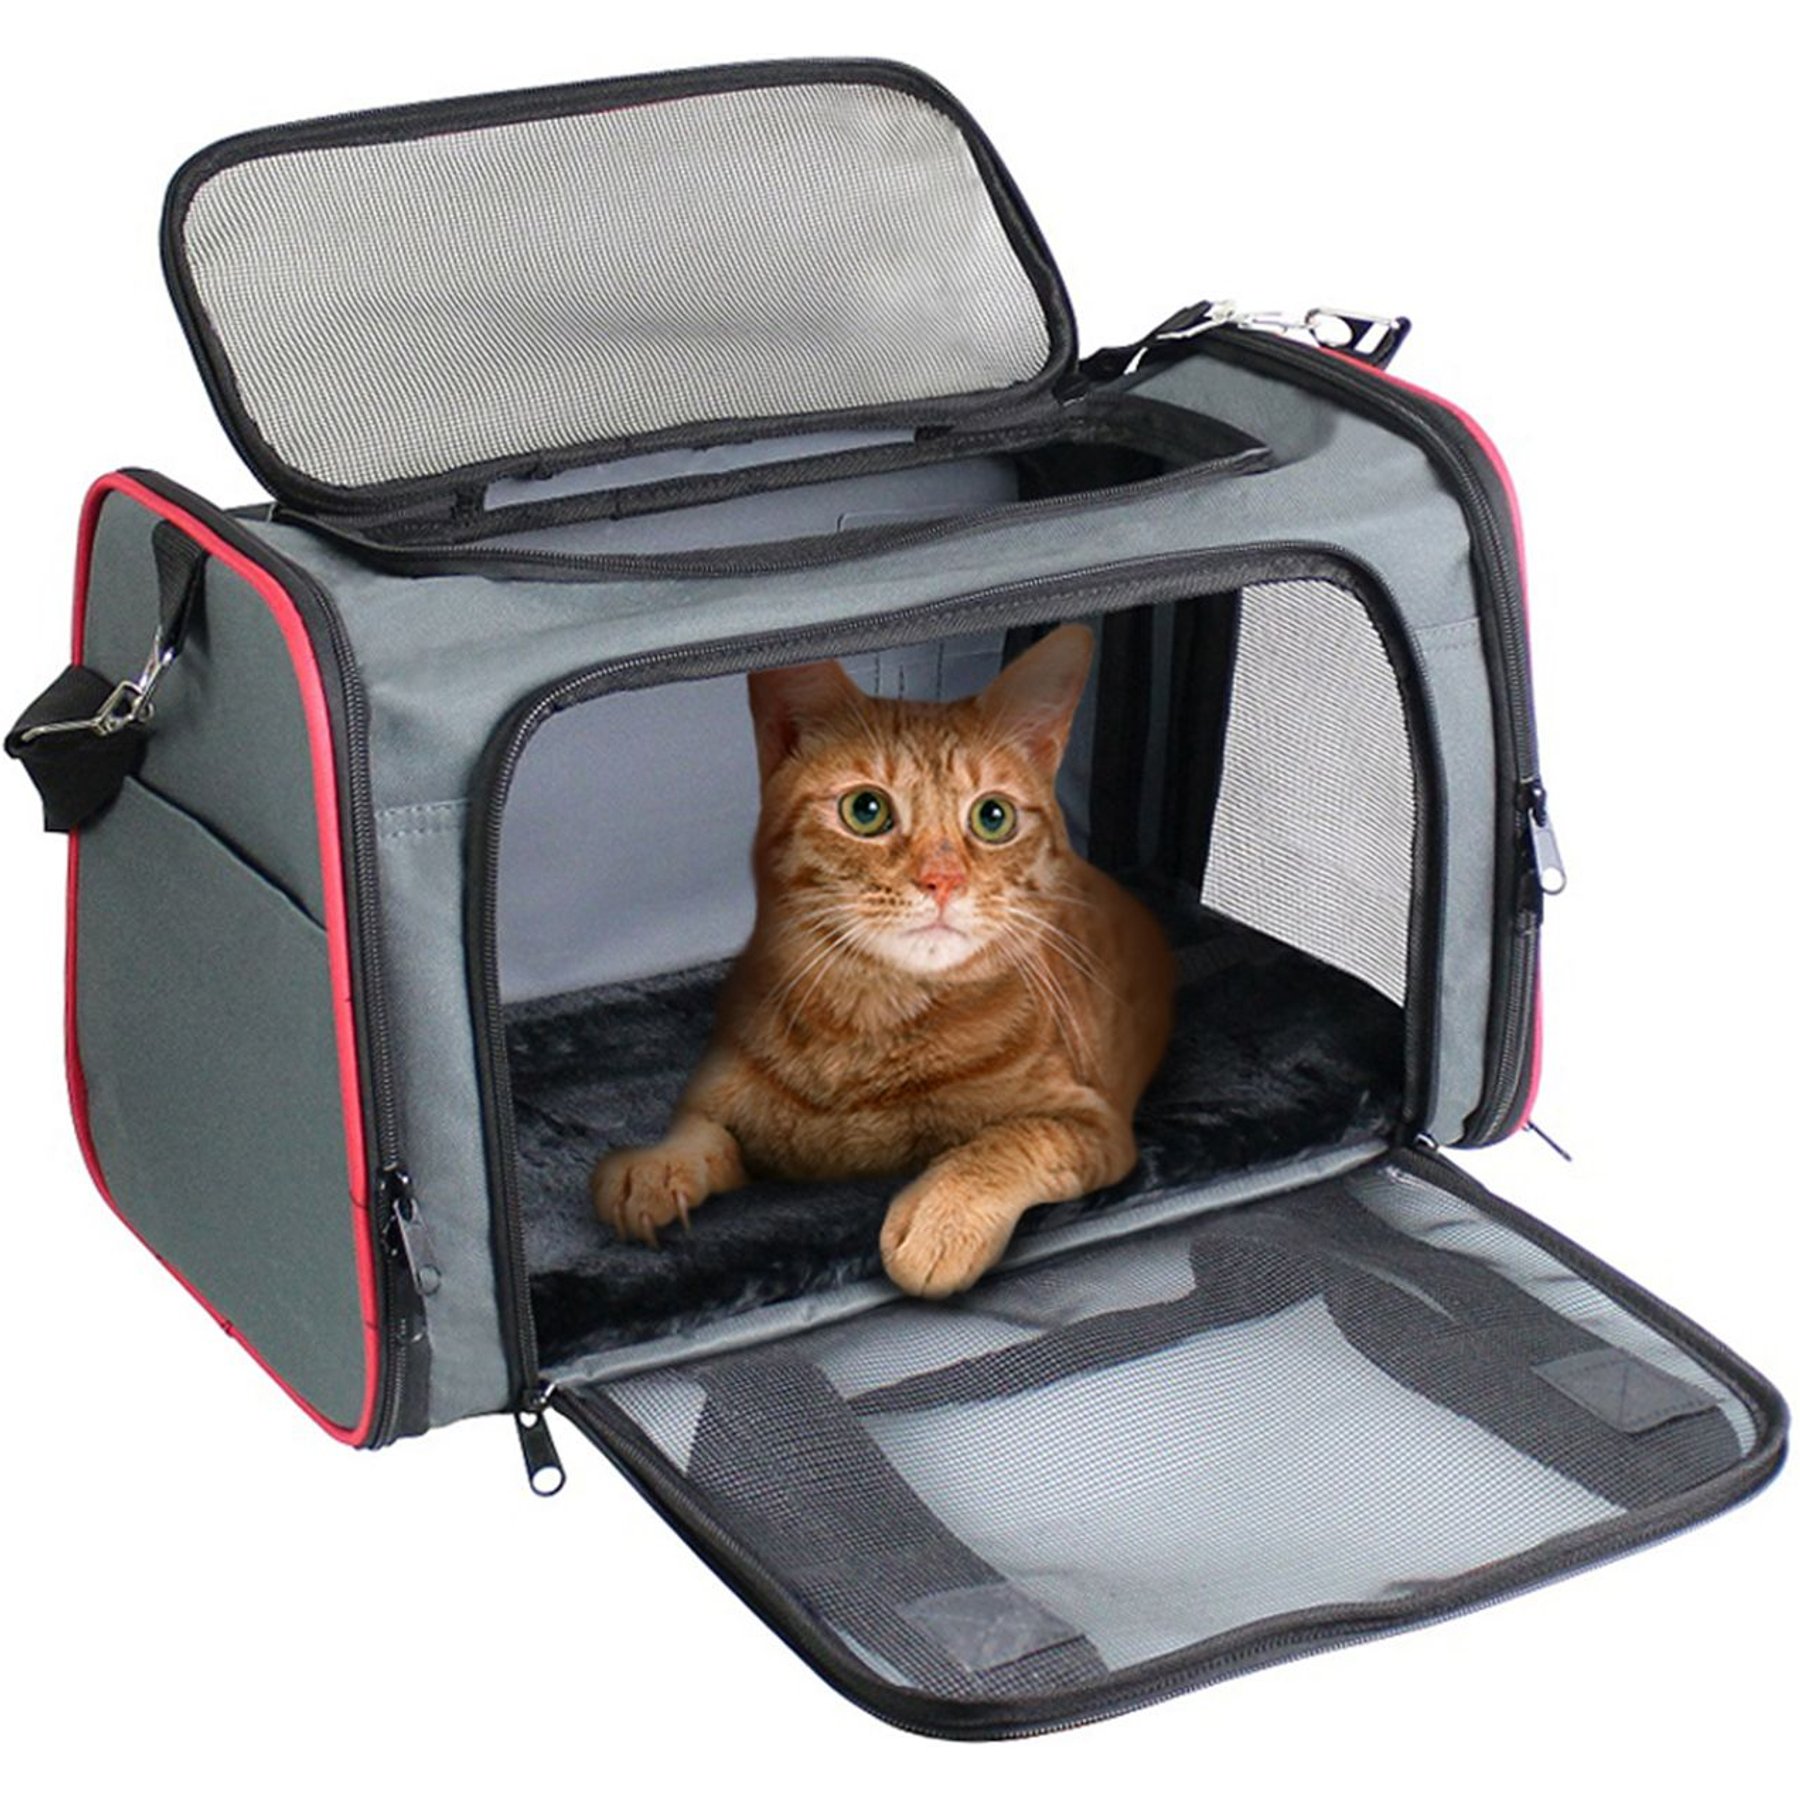 Jespet Soft-Sided Pet Carrier, Airline Approved Pet Carriers Dog Carrier  Collapsible, Collapsible Kennel for Small Dogs Cats, Puppy 